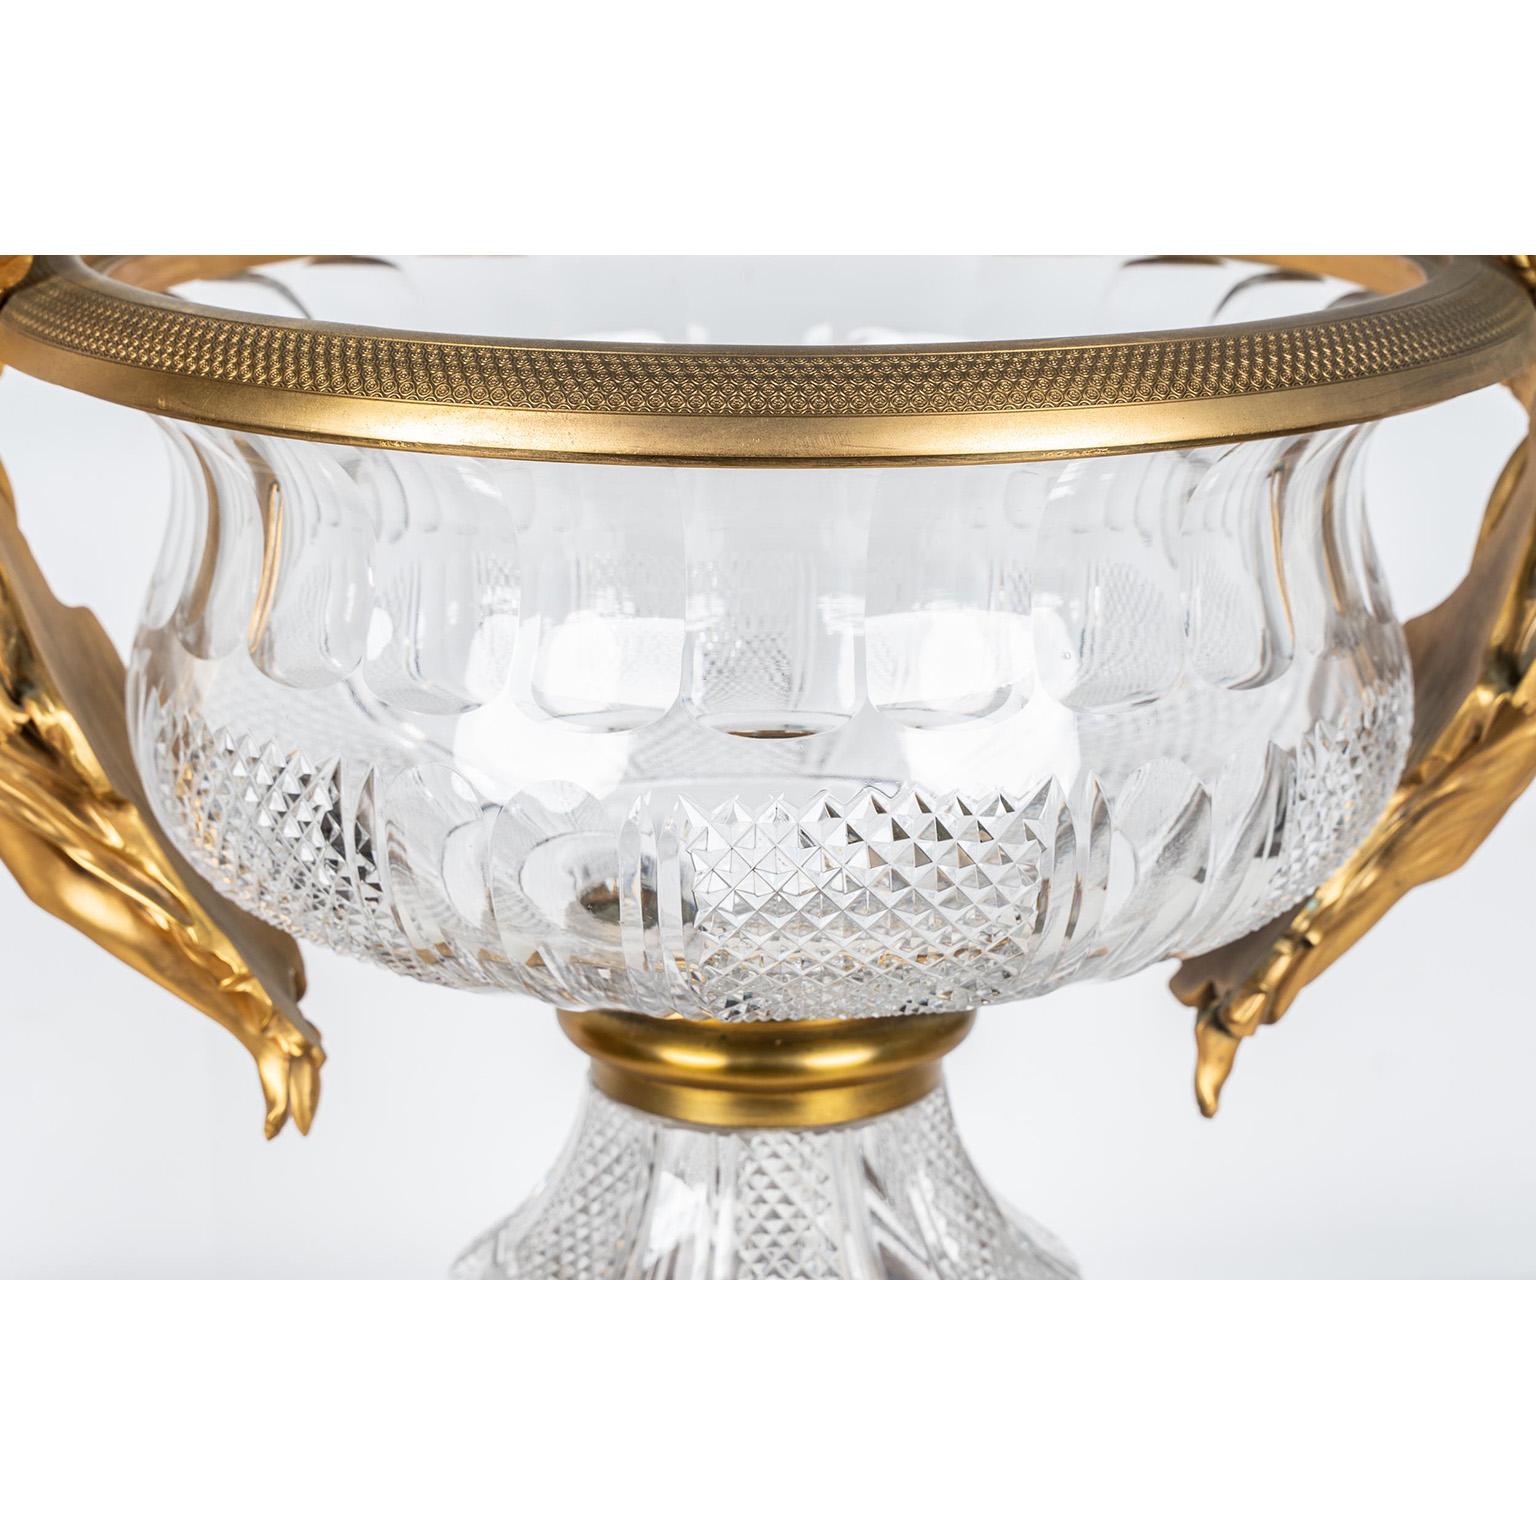 French Large Empire Style Gilt-Bronze and Cut-Glass 'Grande Coupe' Urn Centerpiece For Sale